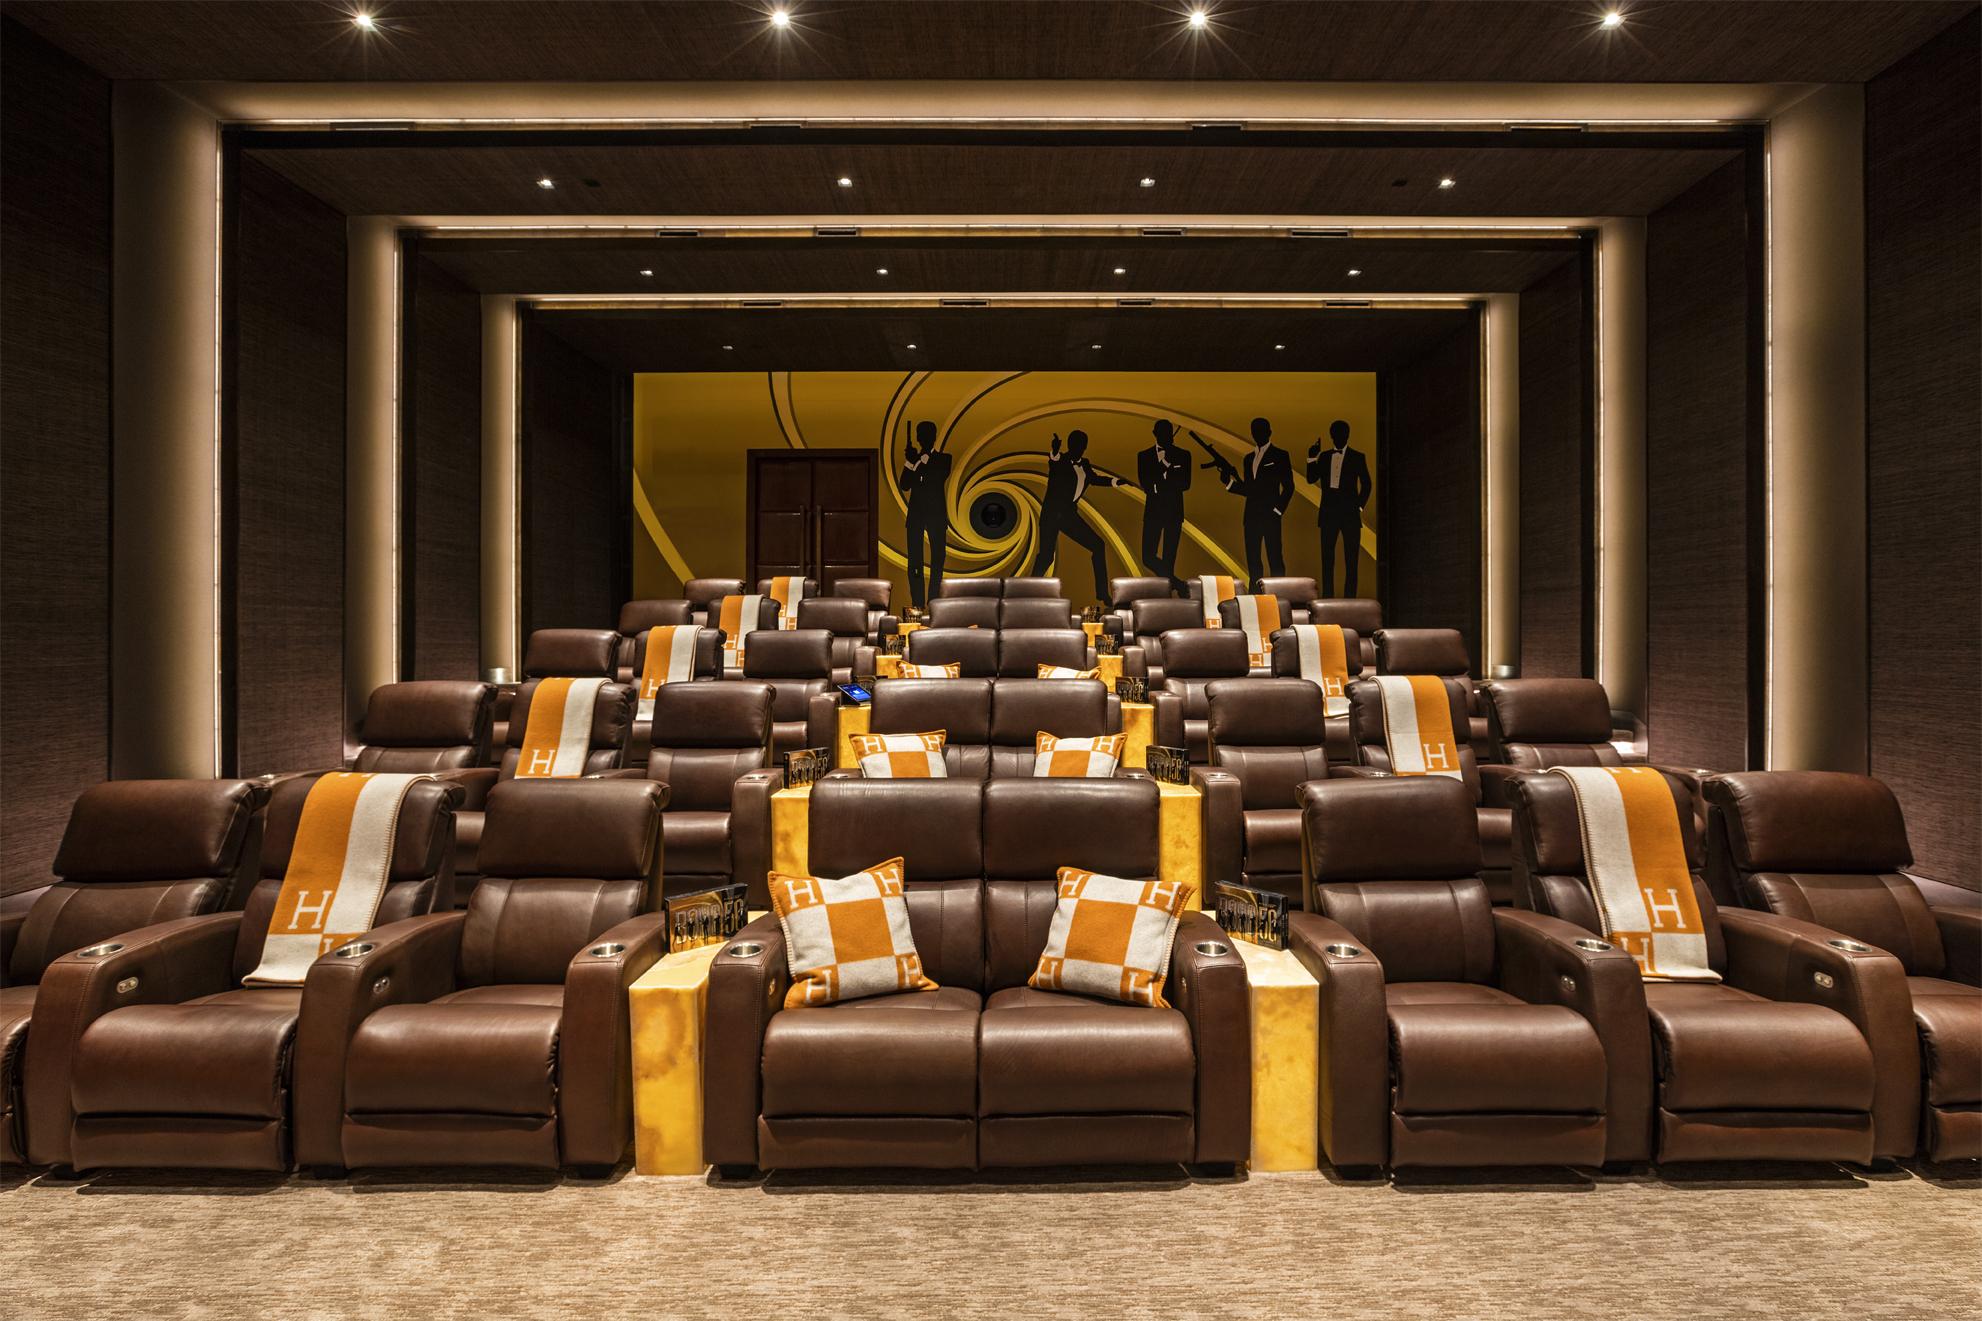 The movie theatre seats 40 (Berlyn Photography)